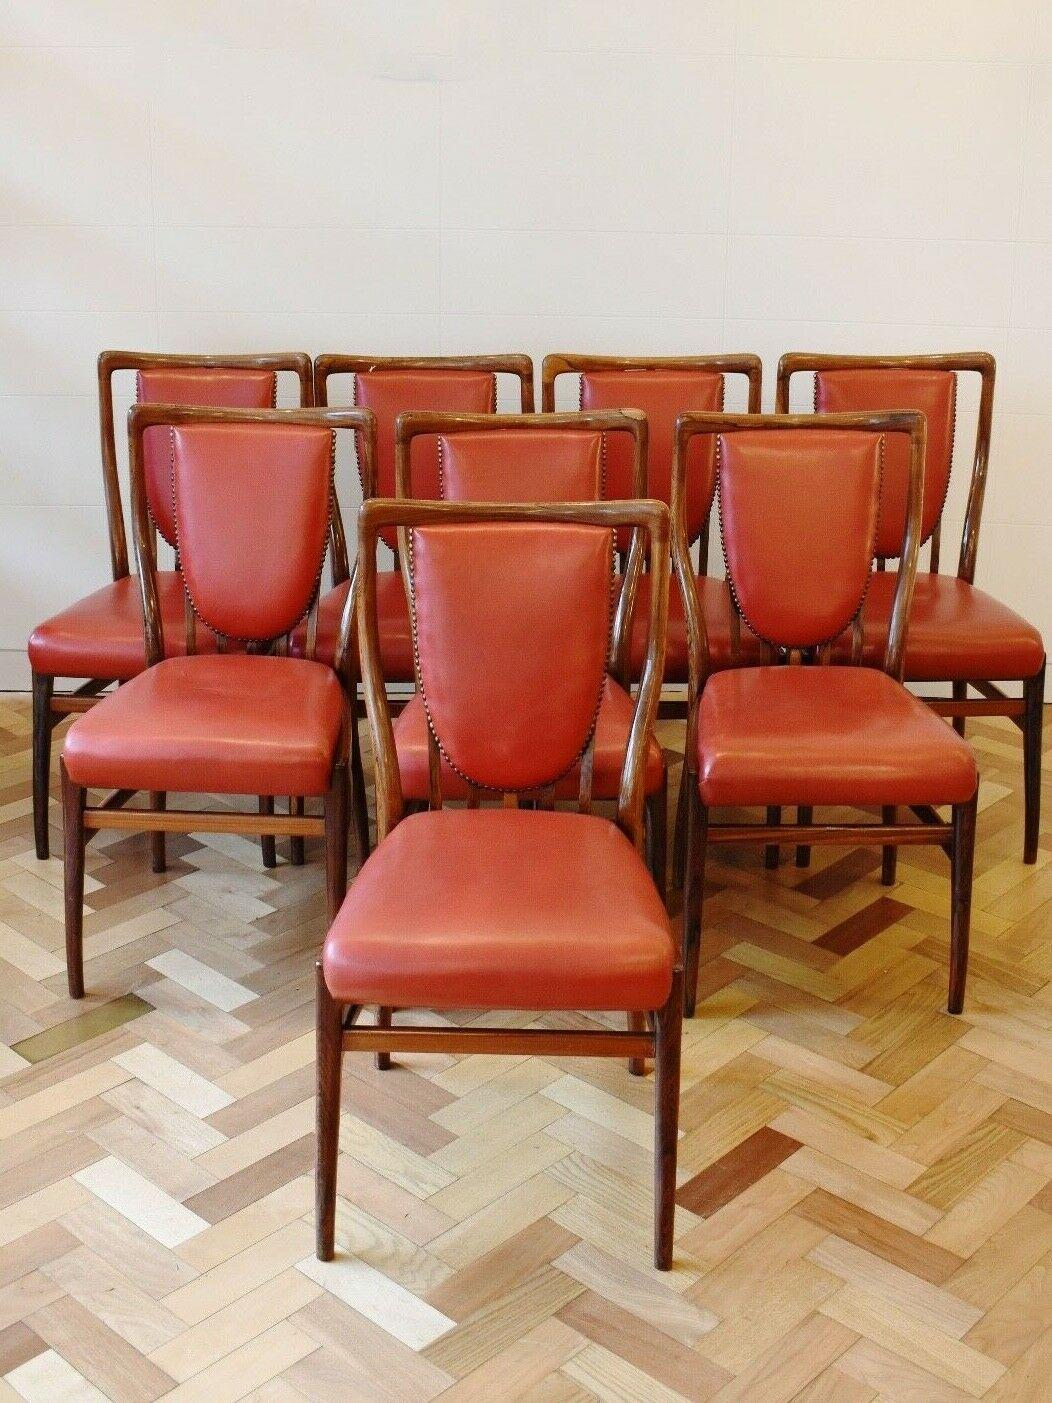 A superb set of 8 1950's Rosewood dining chairs by British designer, Andrew J. Milne - Originally sold in Heal's.

Exceptional quality this set is made from solid rosewood frames with beautiful colour and rosewood grain pattern throughout, the red